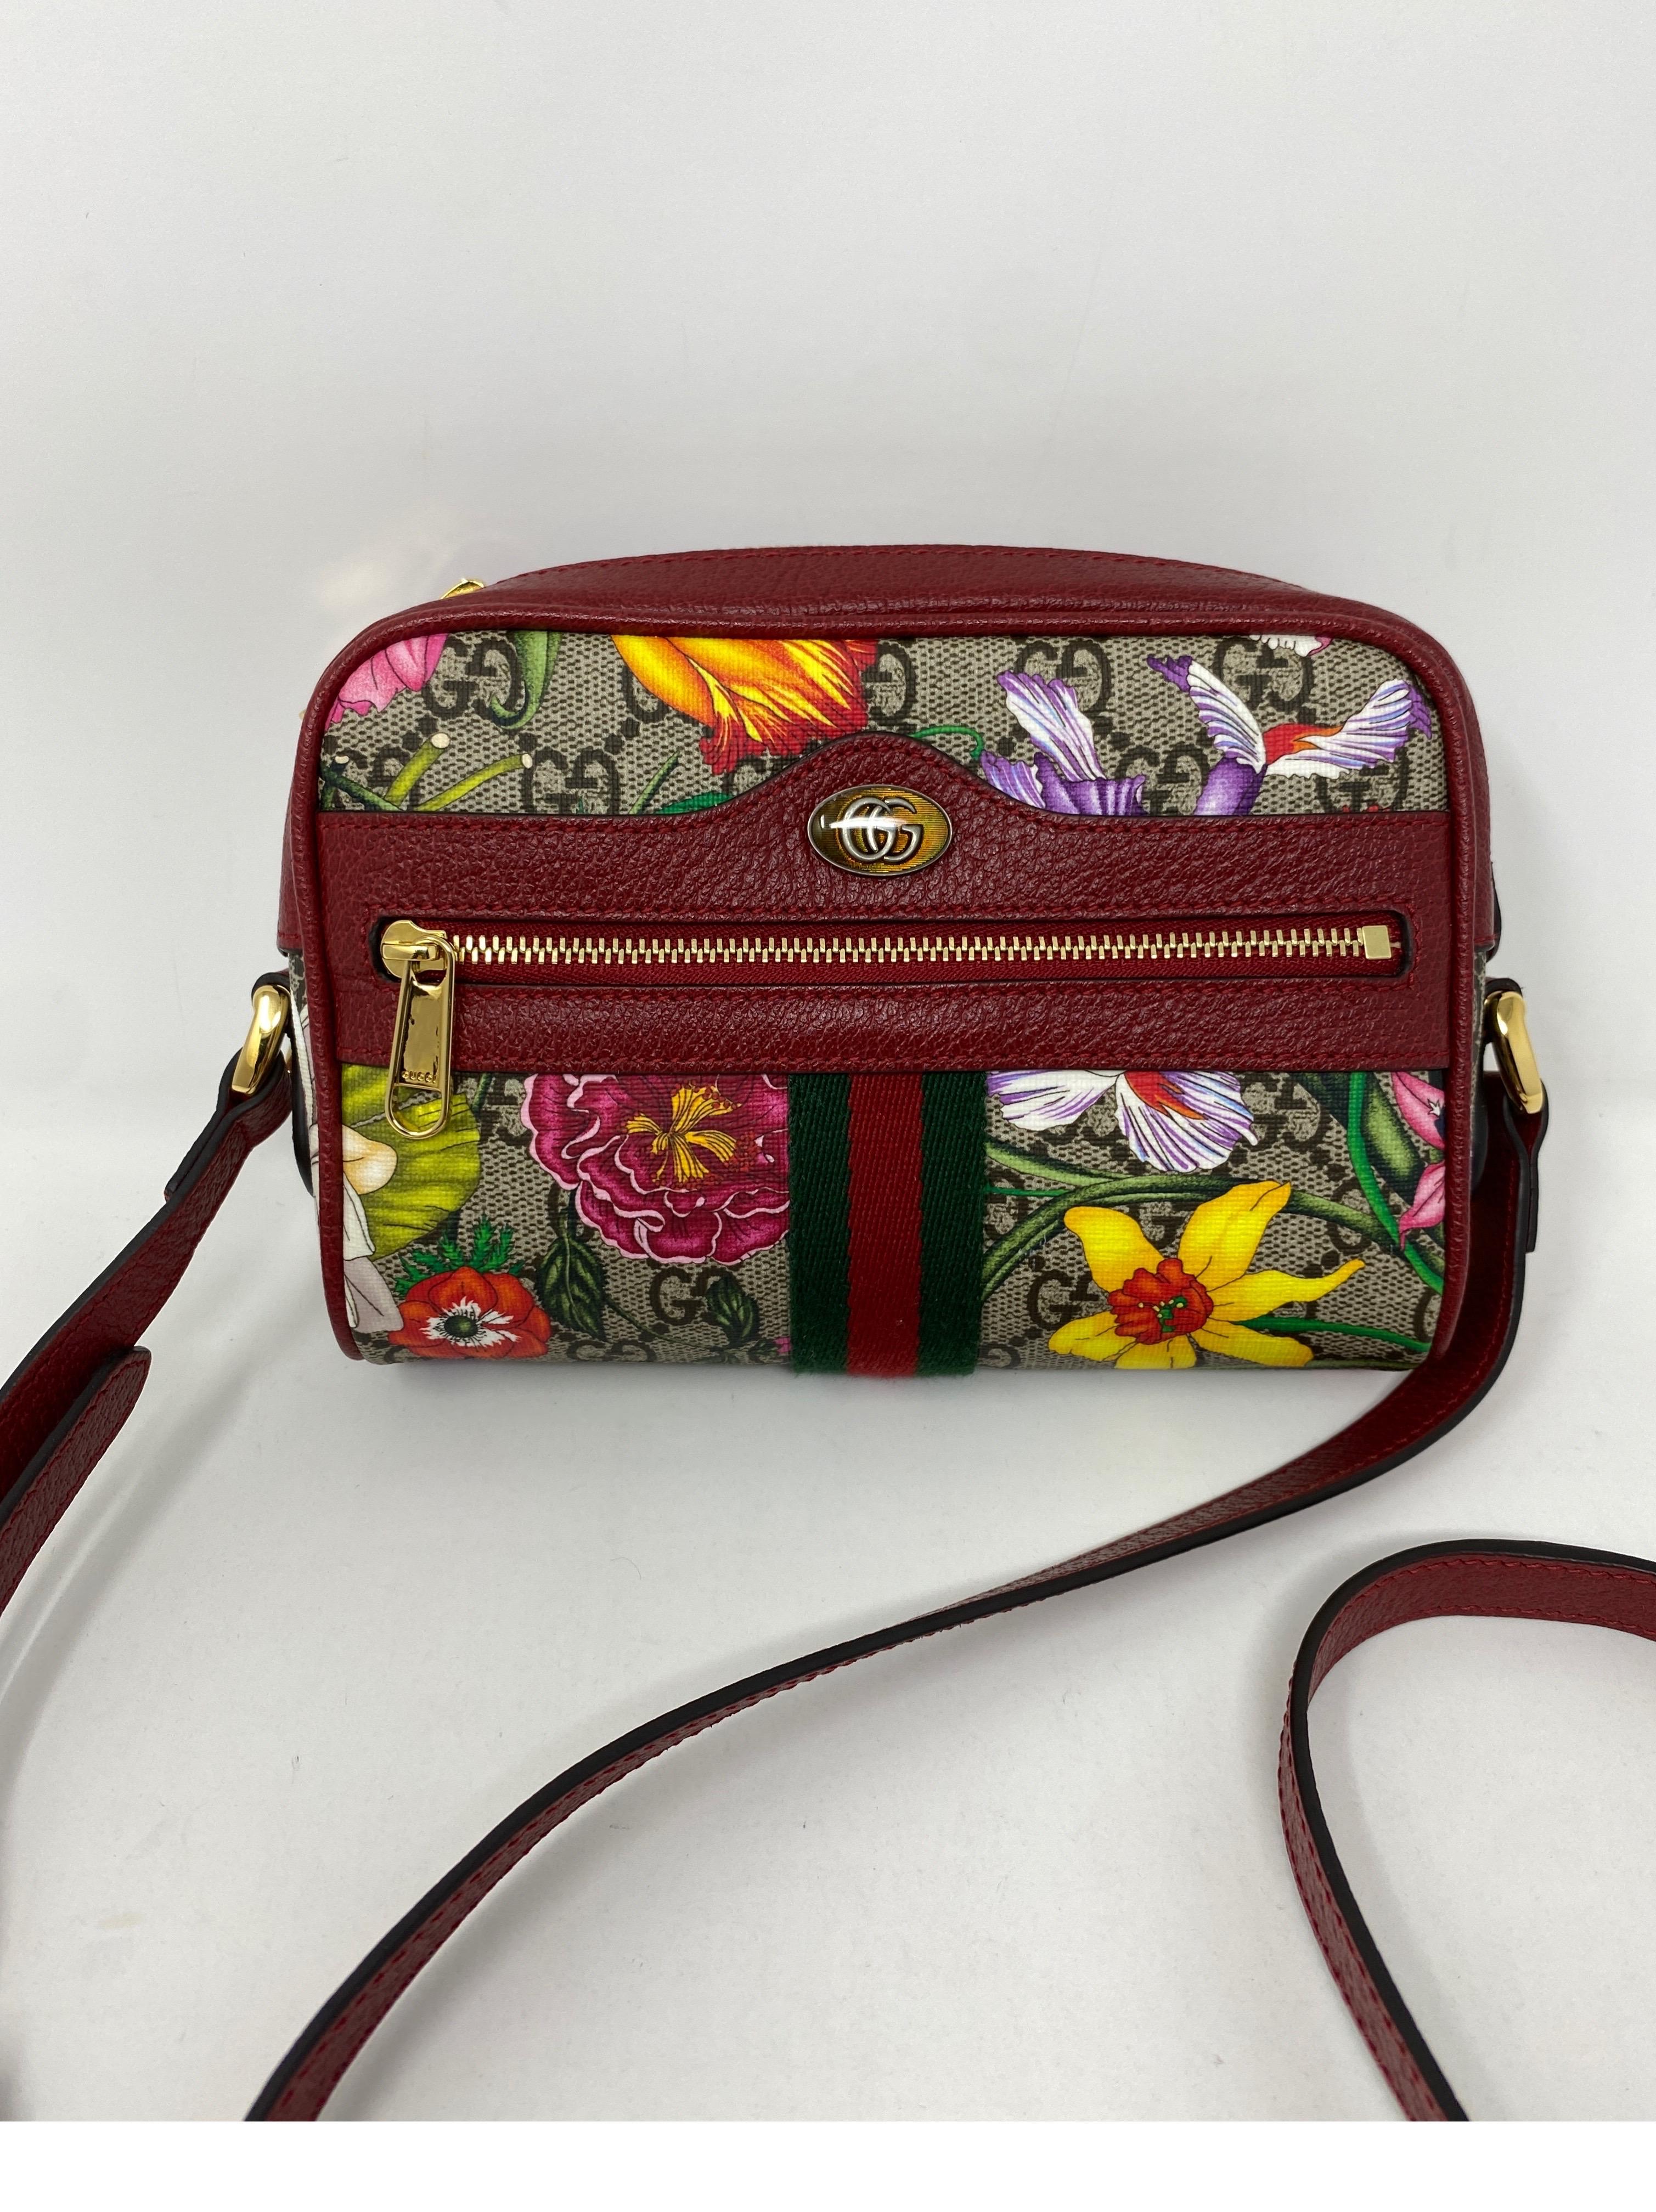 Gucci Floral crossbody Bag. Mint like new condition. Can fit cell phone and wallet, keys, etc. Cute floral pattern. Guaranteed authentic. 